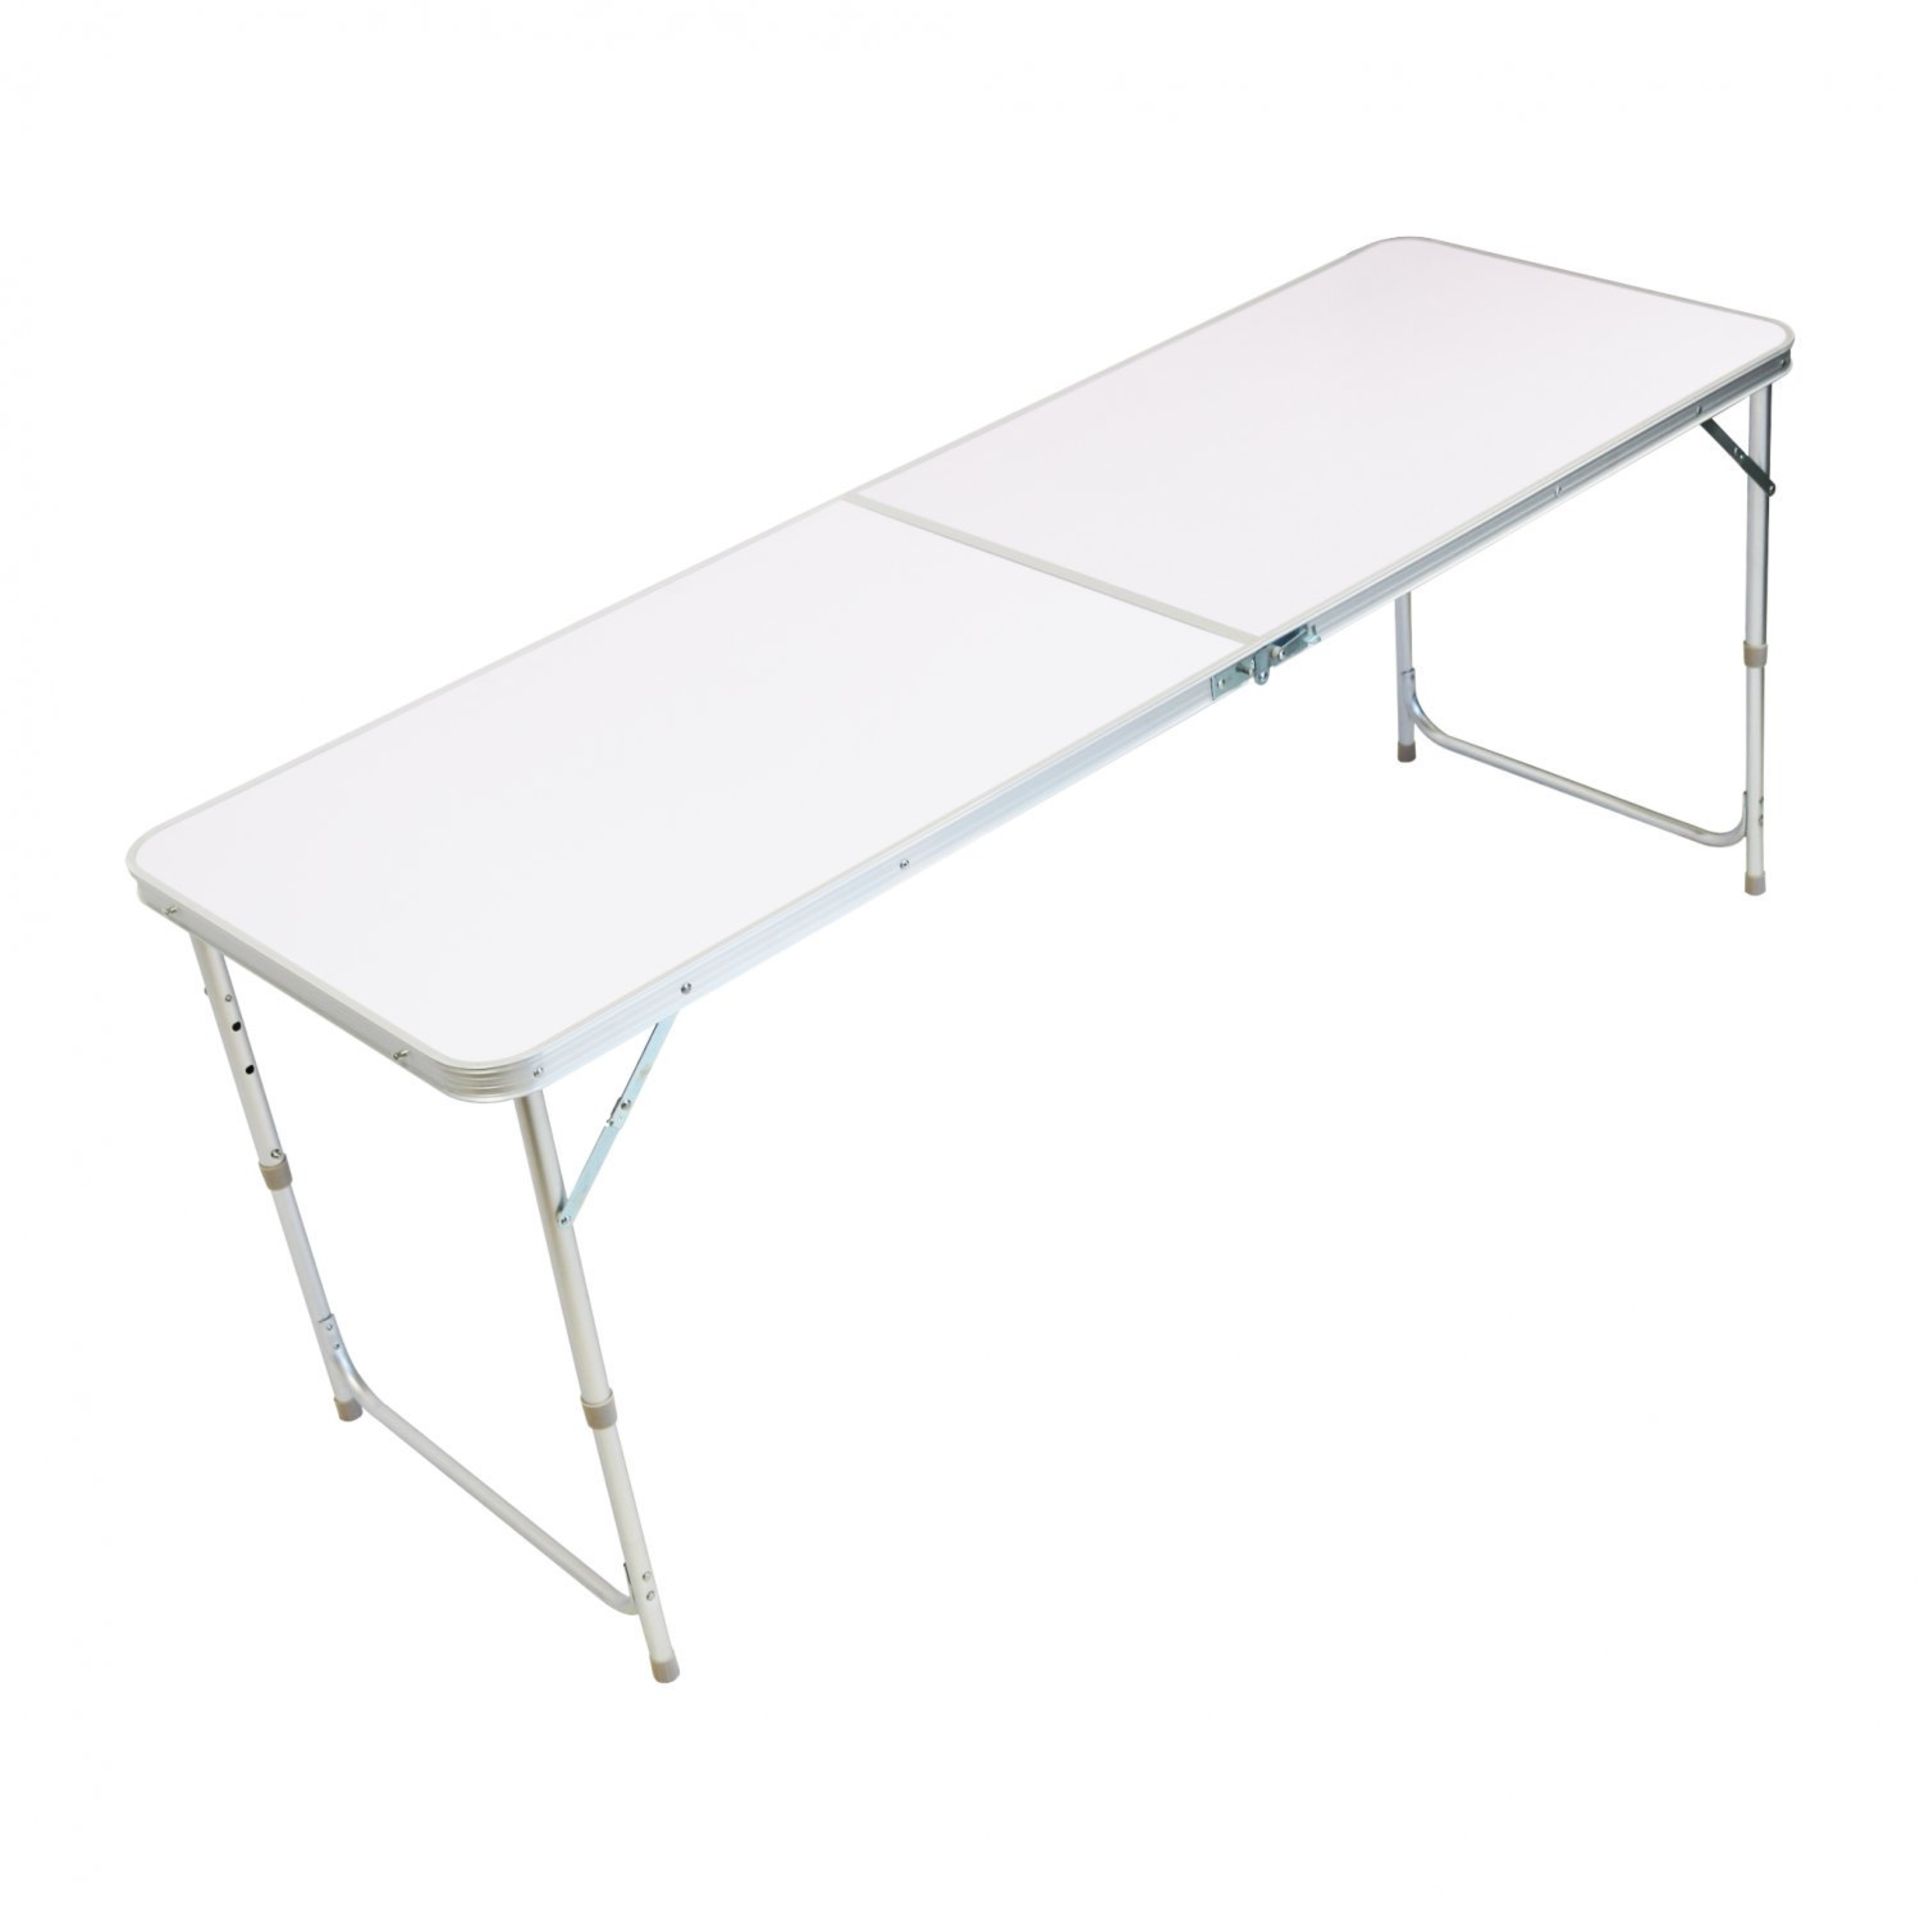 (QW18) 4ft Folding Outdoor Camping Kitchen Work Top Table Lightweight Aluminium Table with Adj...